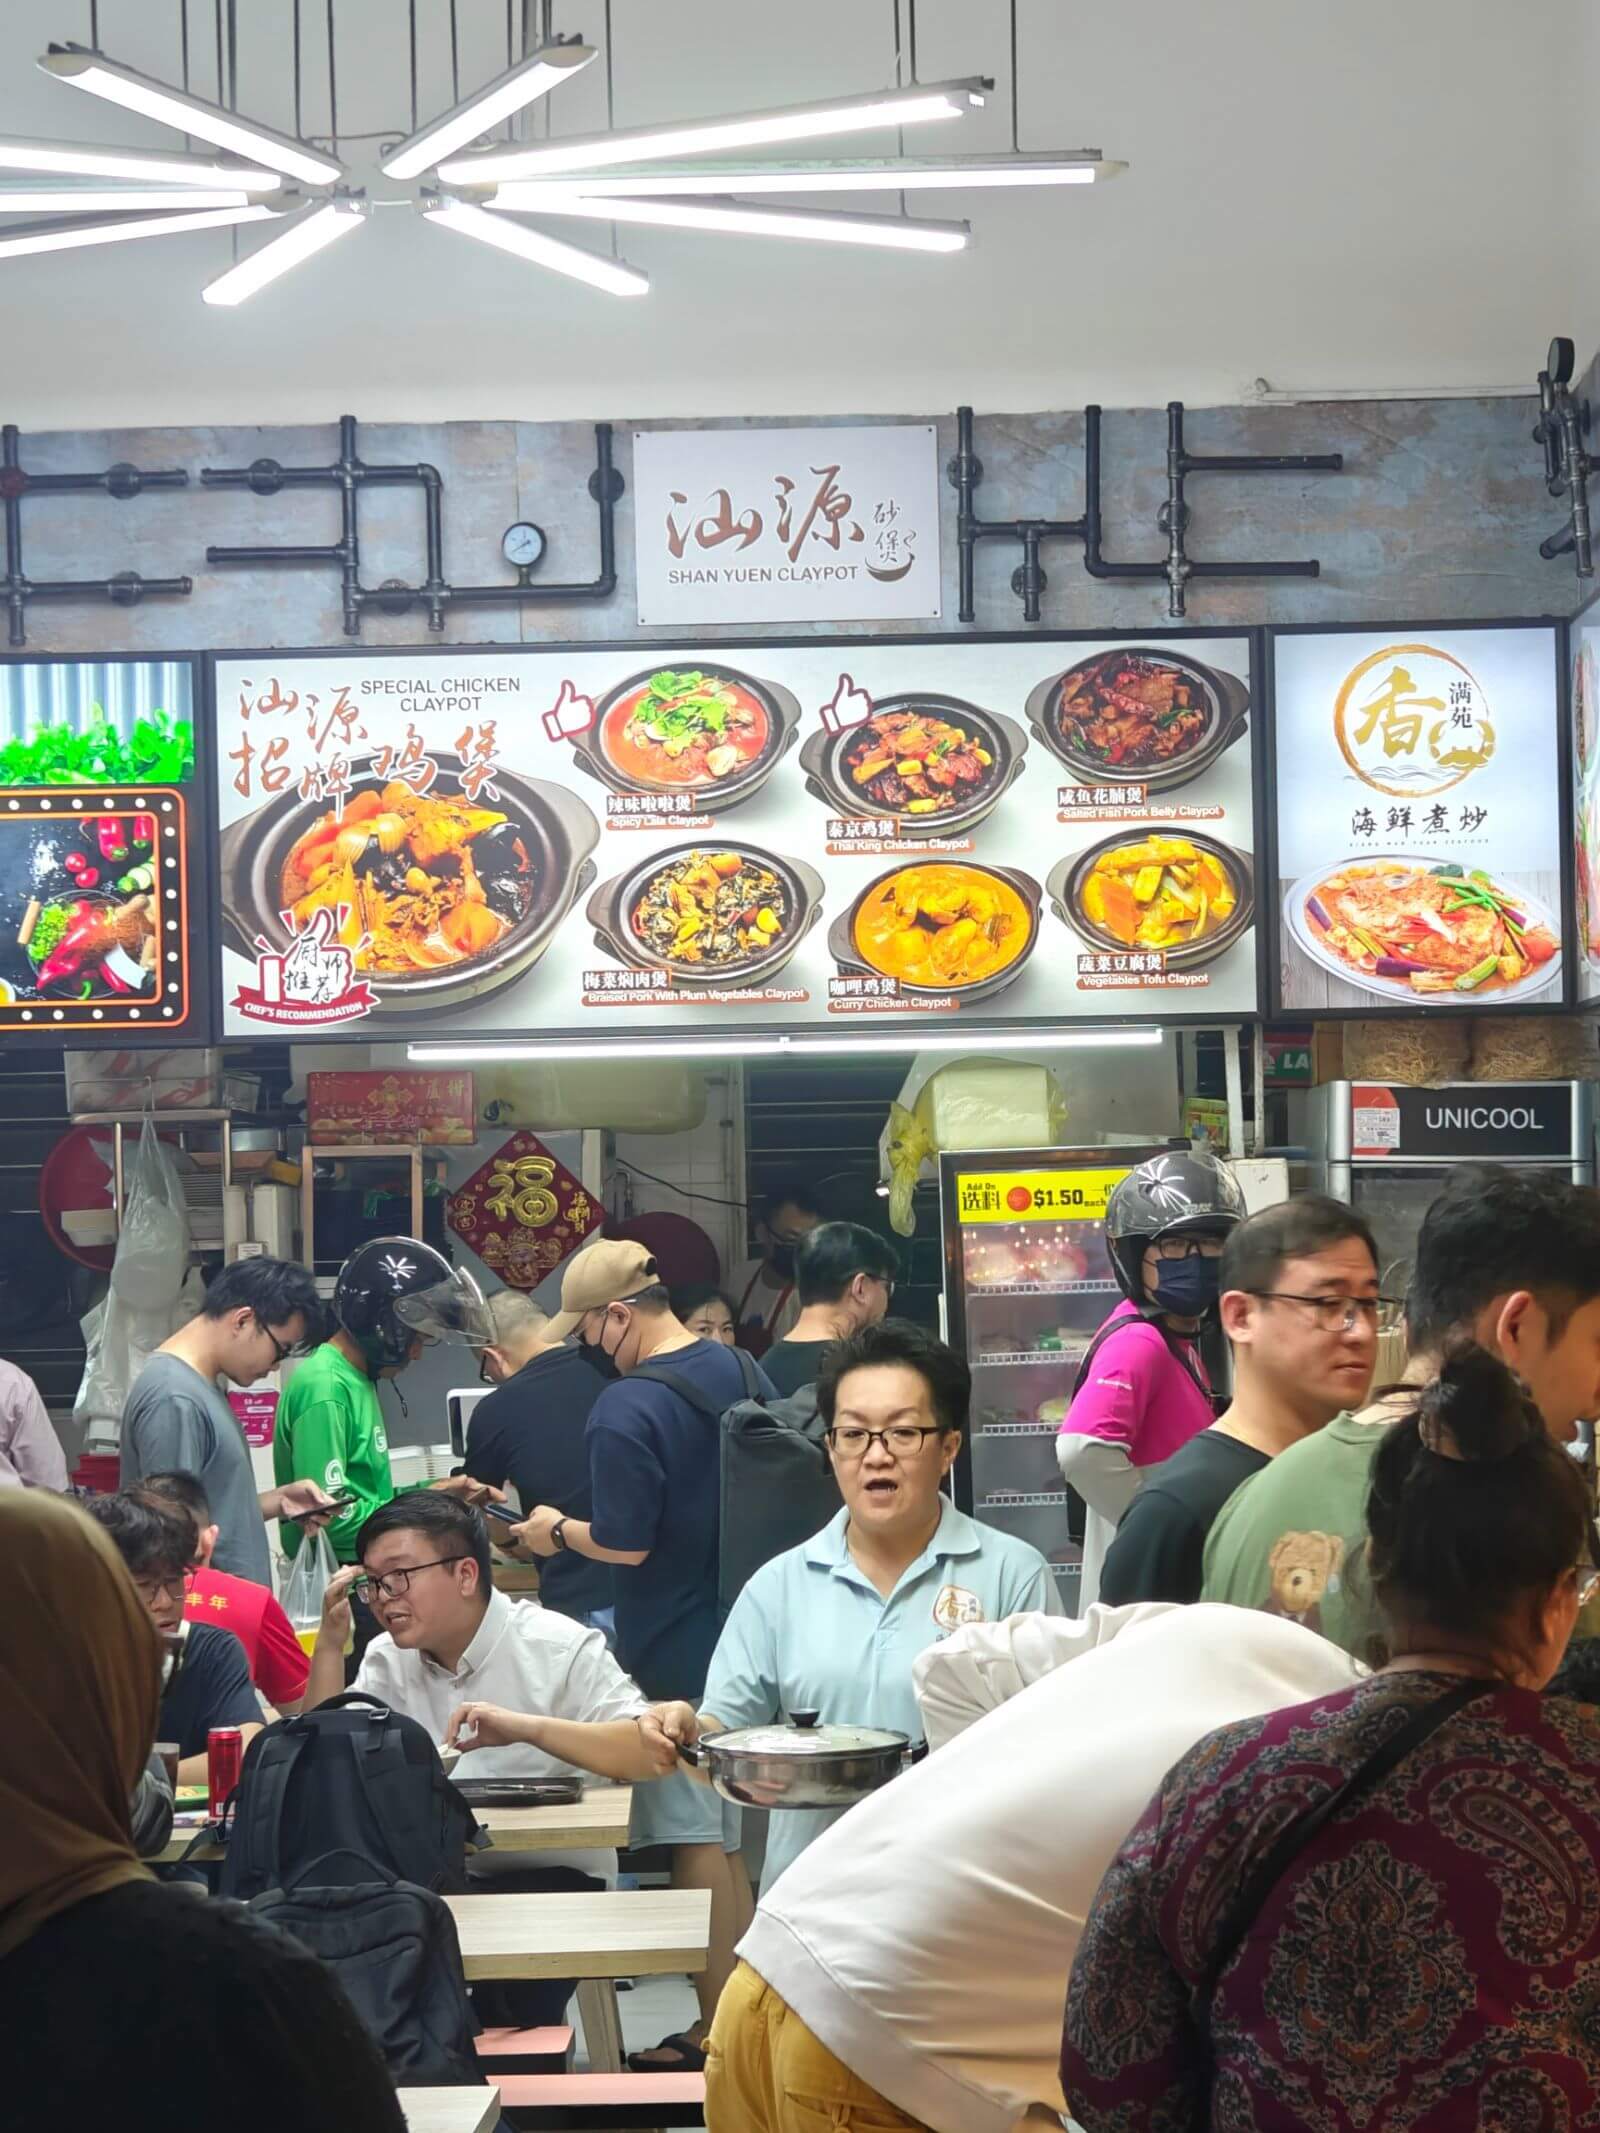 Woodlands Food Stall To Take Over